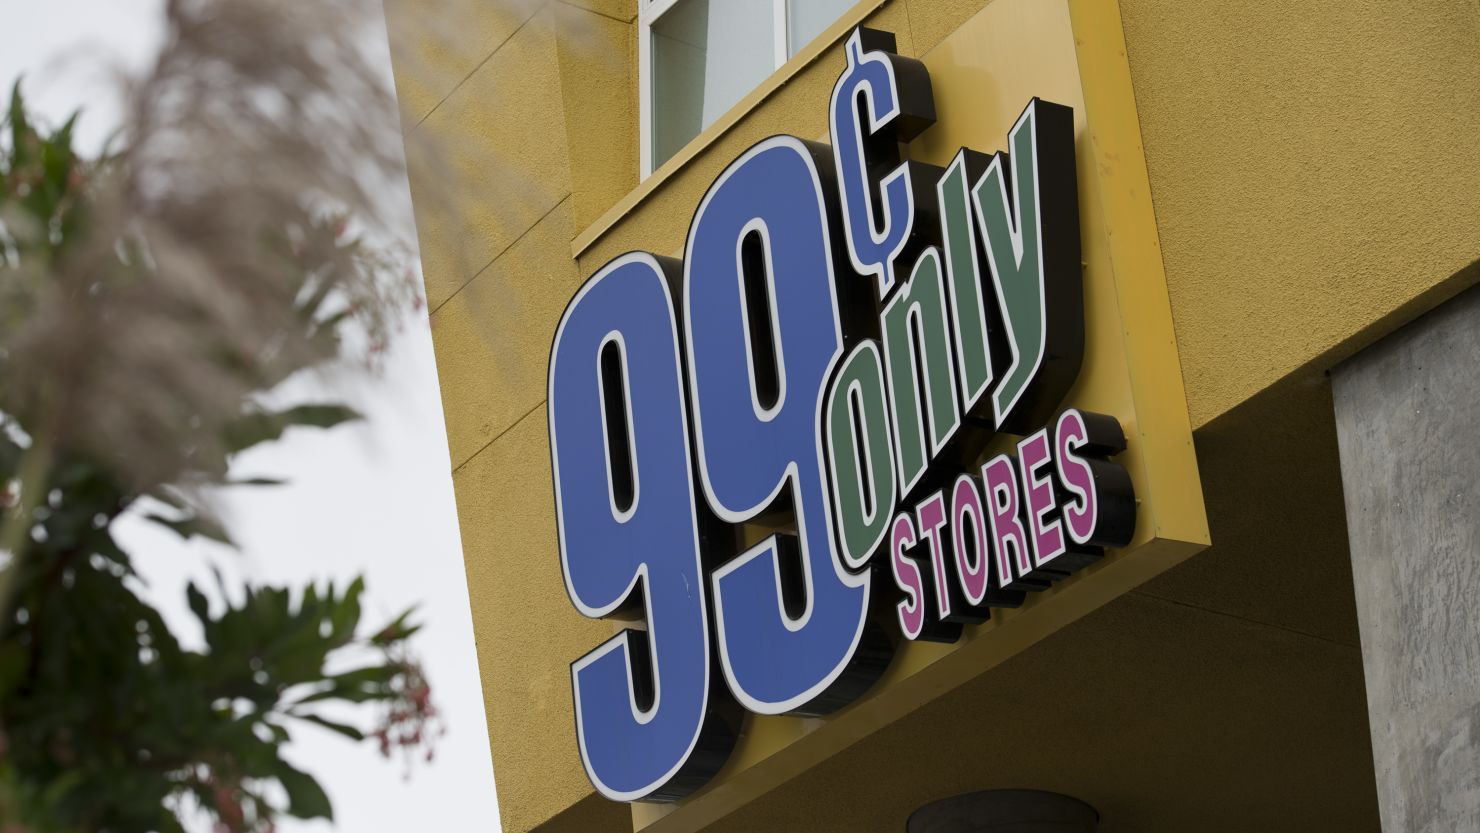 99 Cents Only Store signage is displayed on the facade of a store in Oakland, California, U.S., on Monday, Aug. 22, 2011.